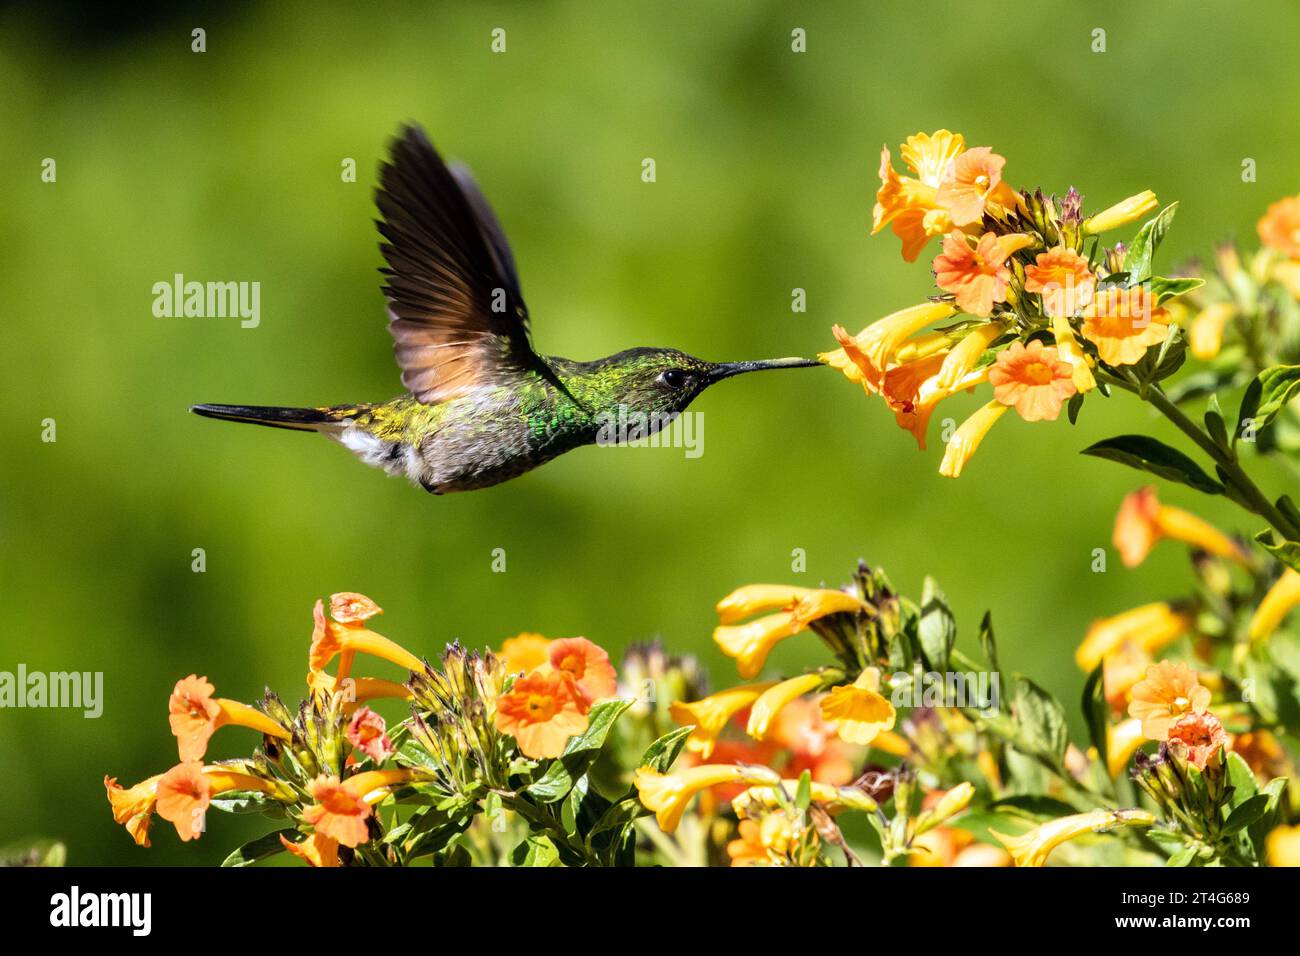 Closeup of Stripe-tailed Hummingbird in flight and feeding from flowers in Chiriqui Province, Panama Stock Photo